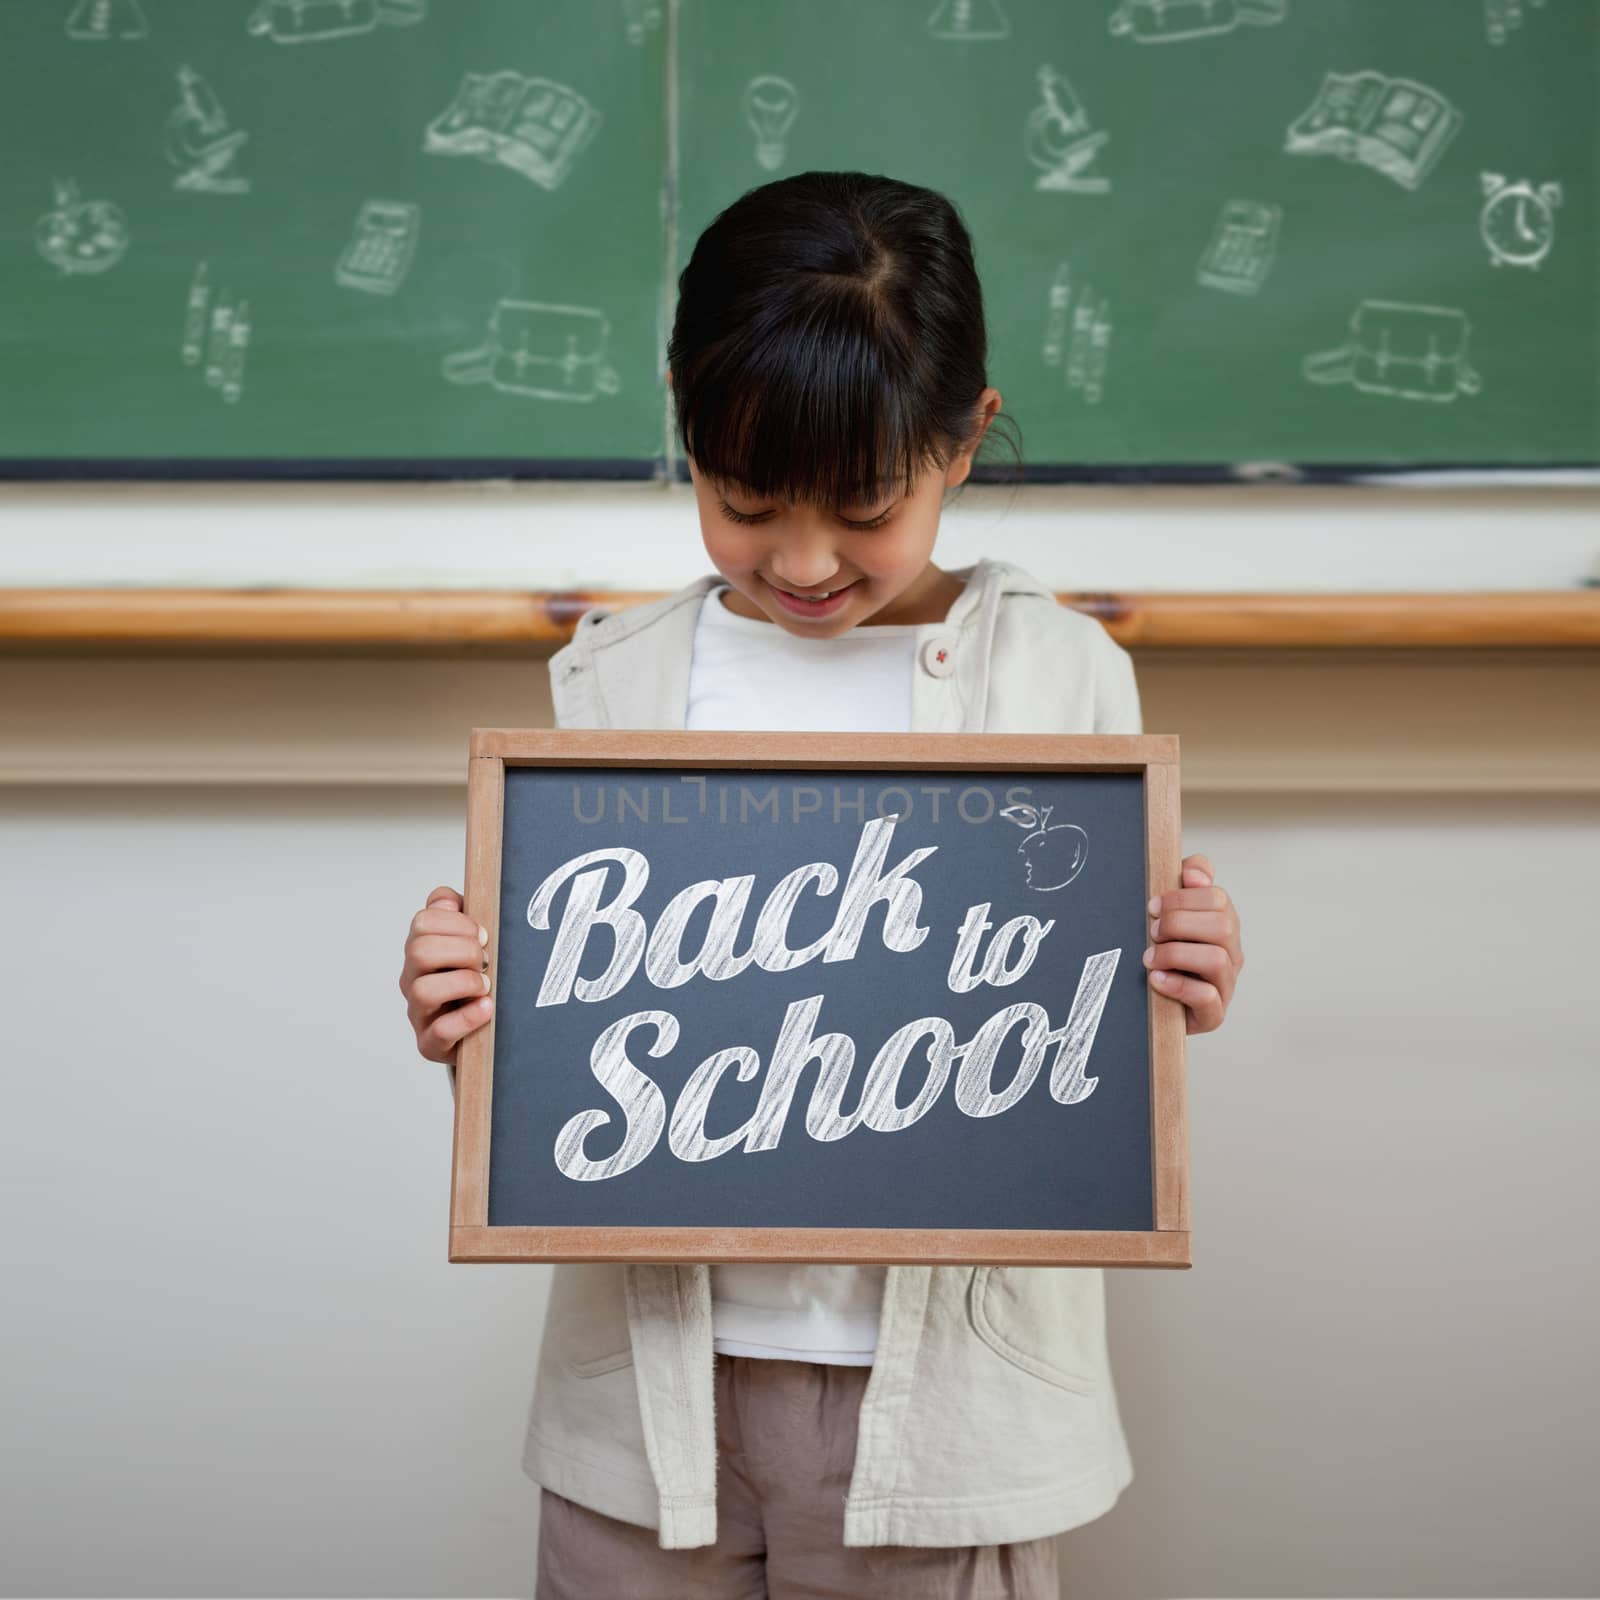 Composite image of back to school message by Wavebreakmedia